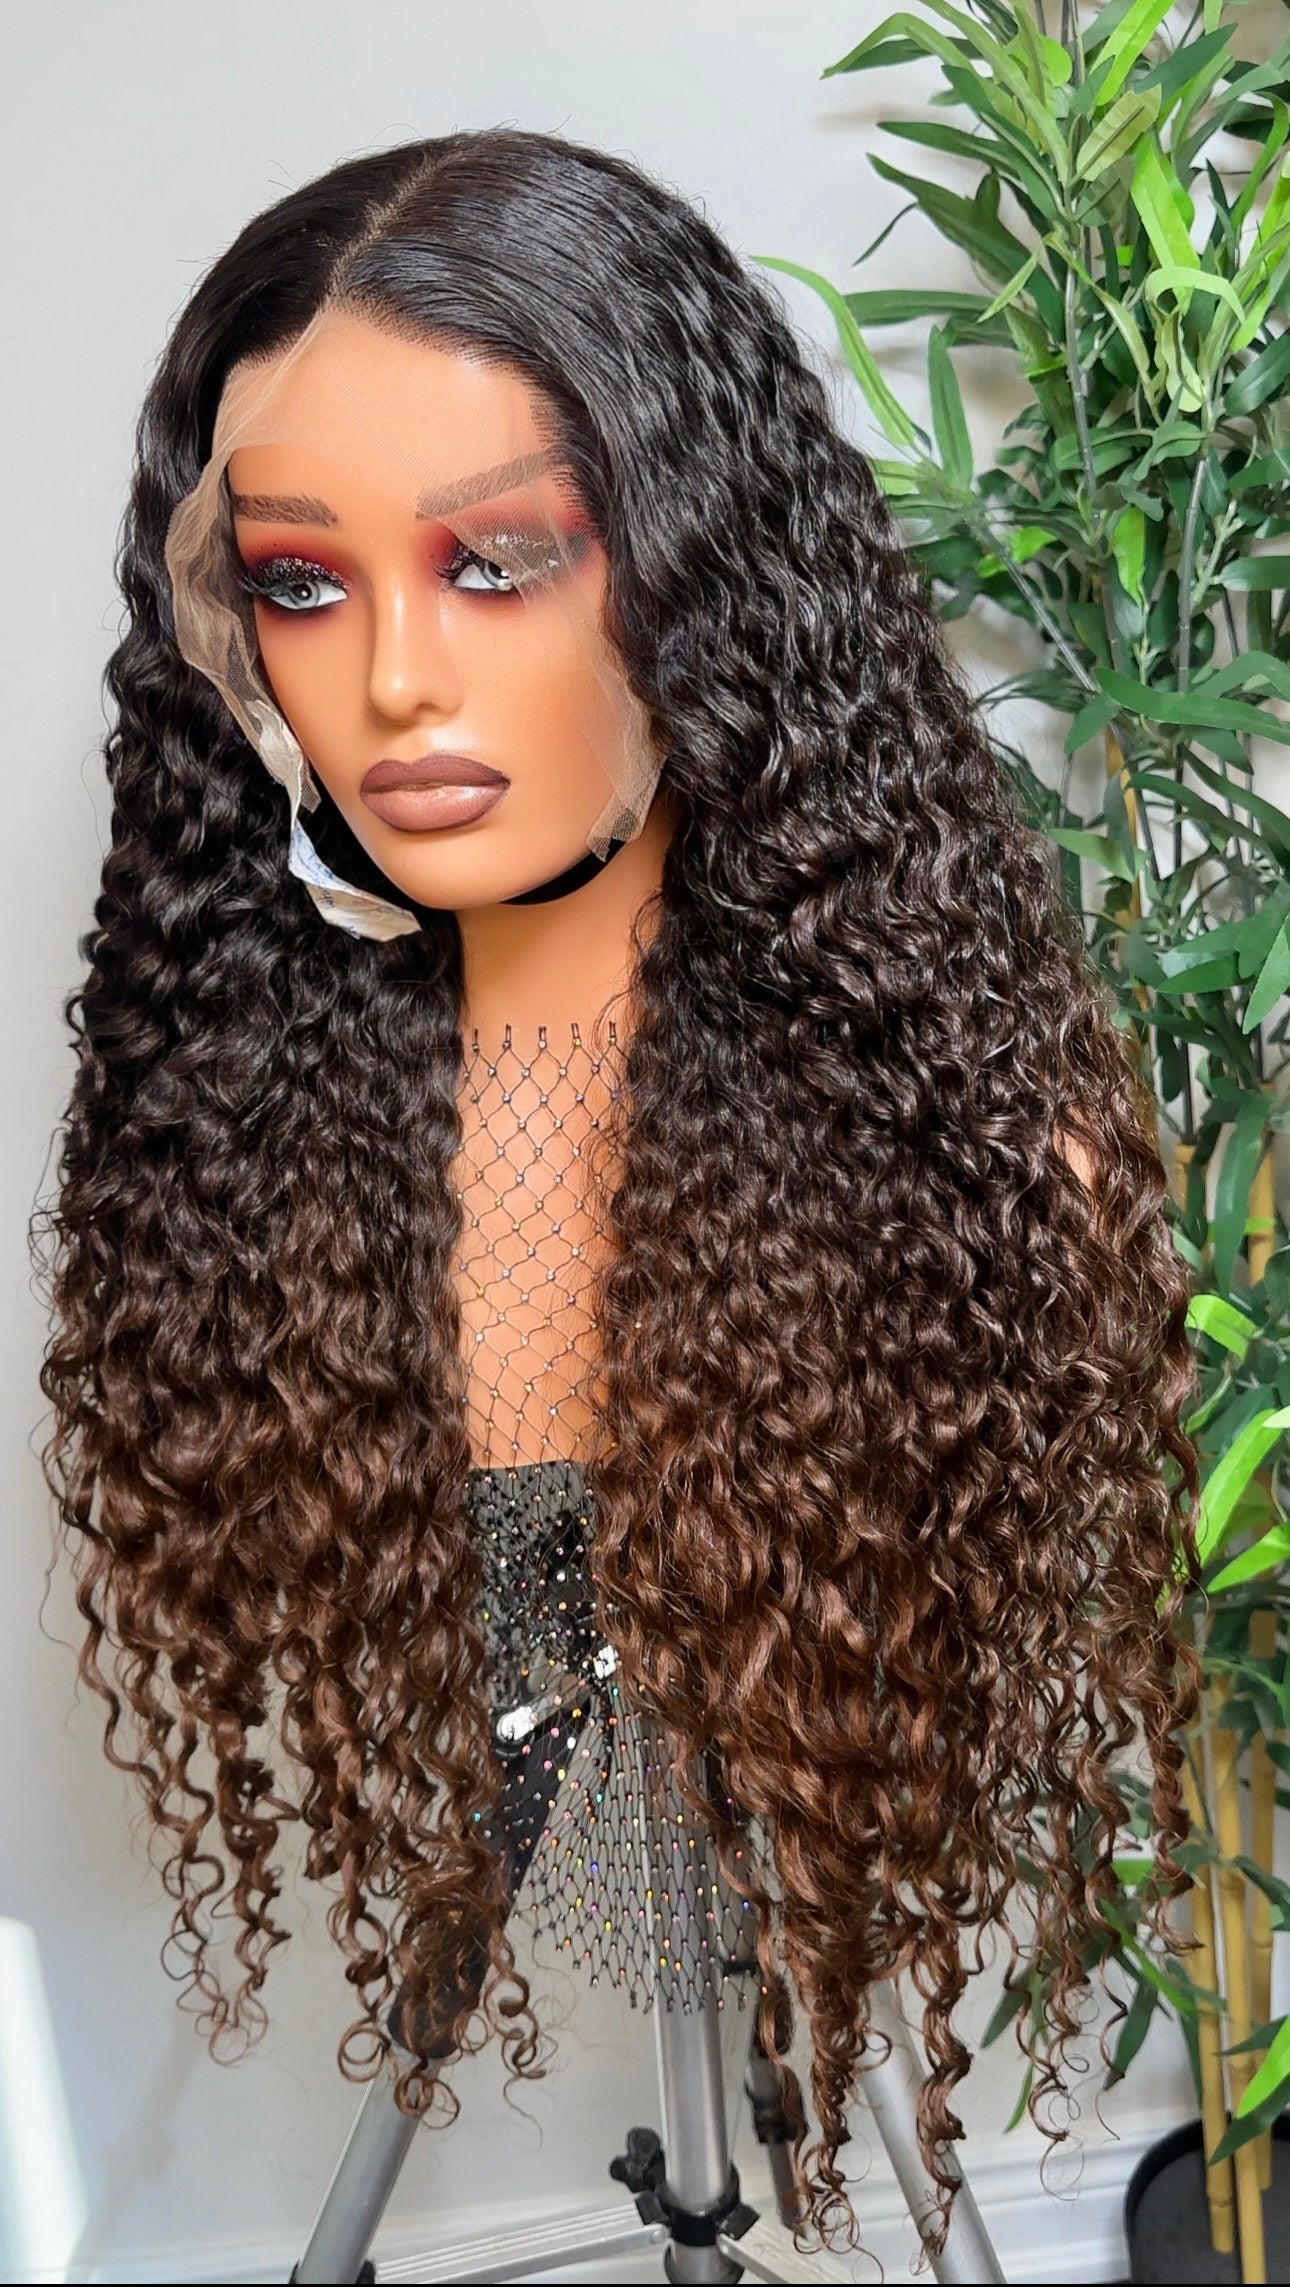 SOUTH EAST RAW CURLY LACE FRONTAL LUXURY WIG